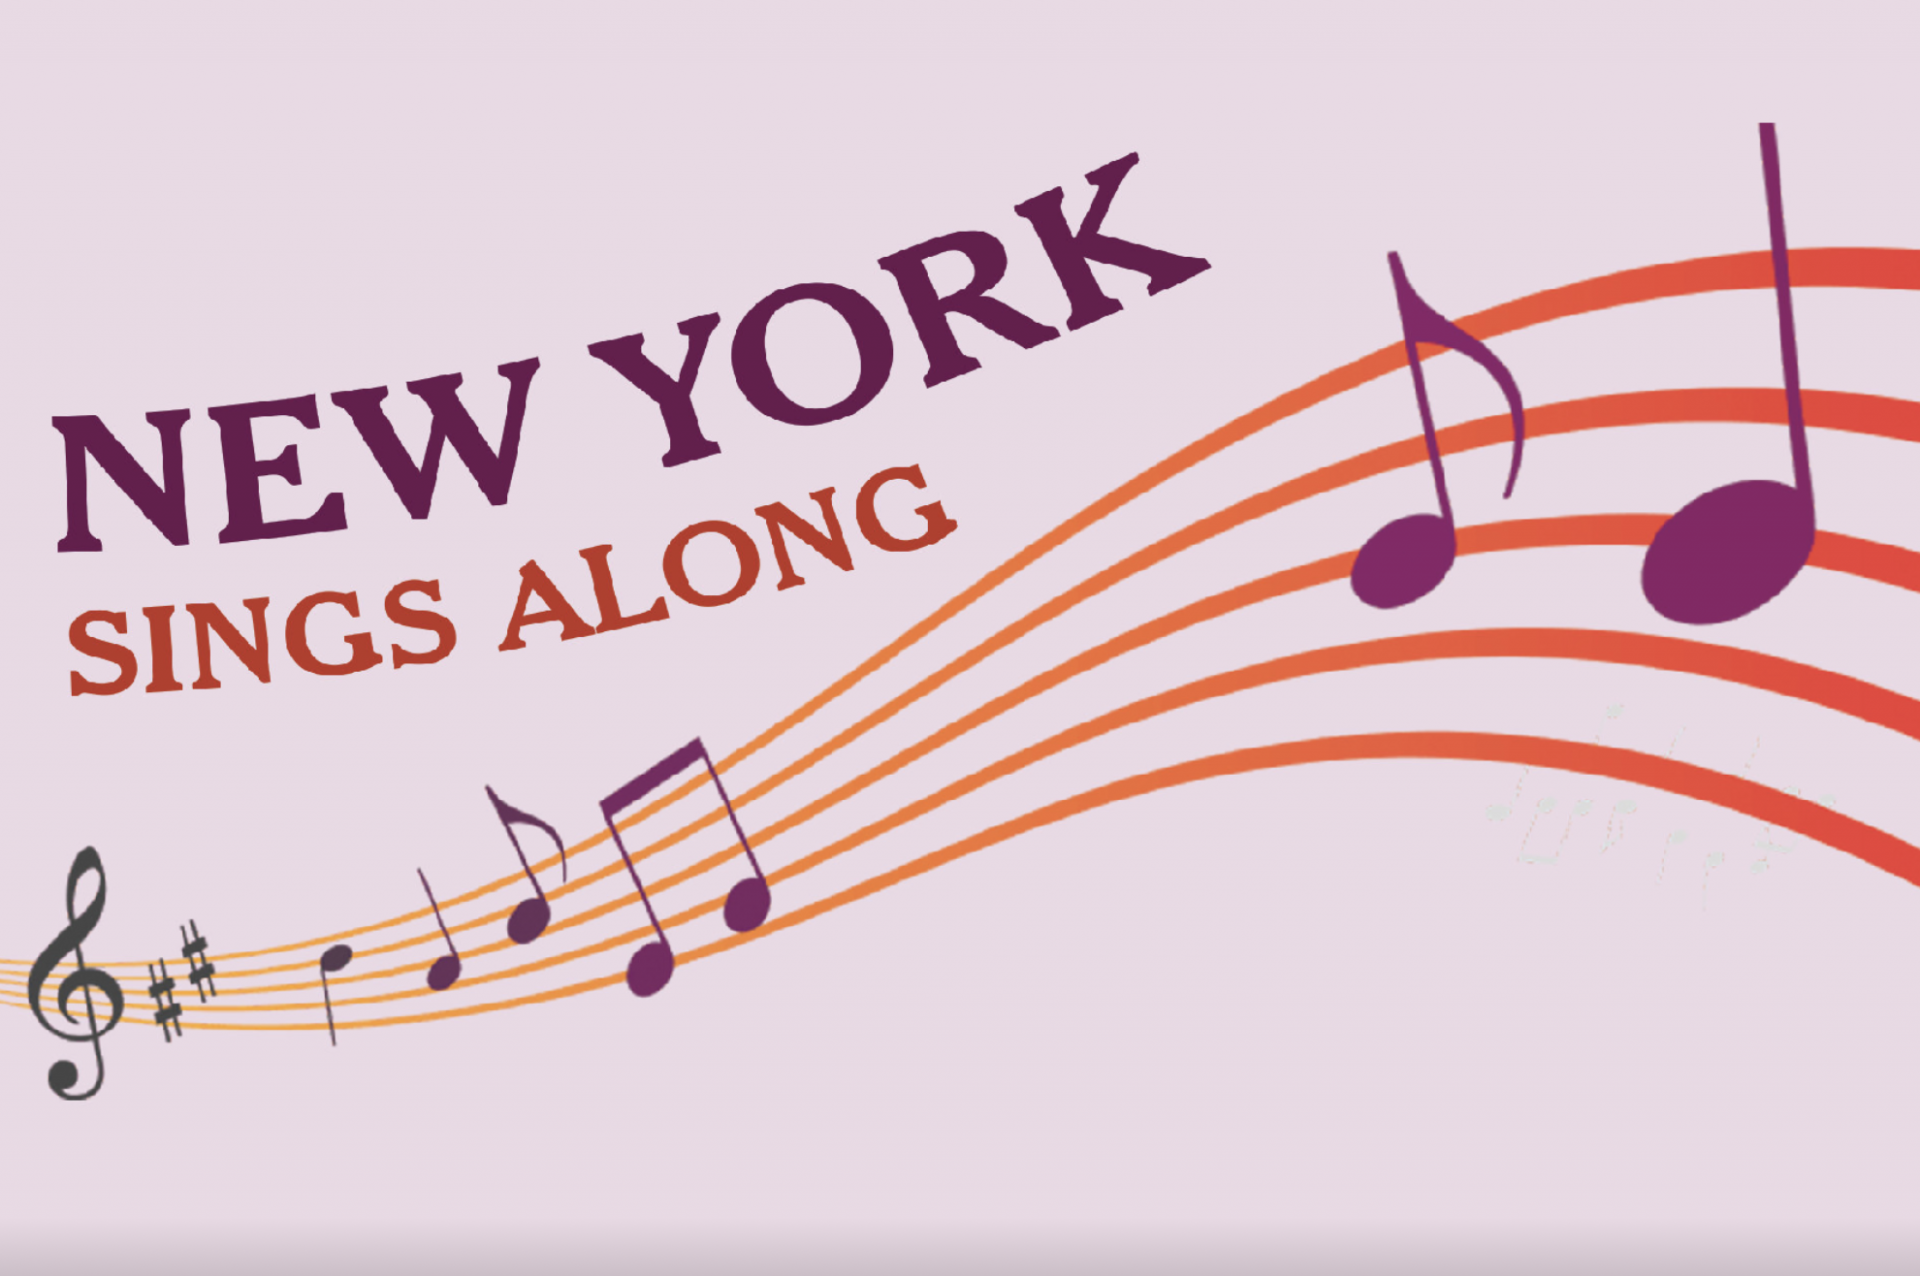 The New York Sings Along logo: A swooping musical staff that starts in yellow and turns red is filled with musical notes and sits on a pink background. Above it is the project’s name in purple and red.